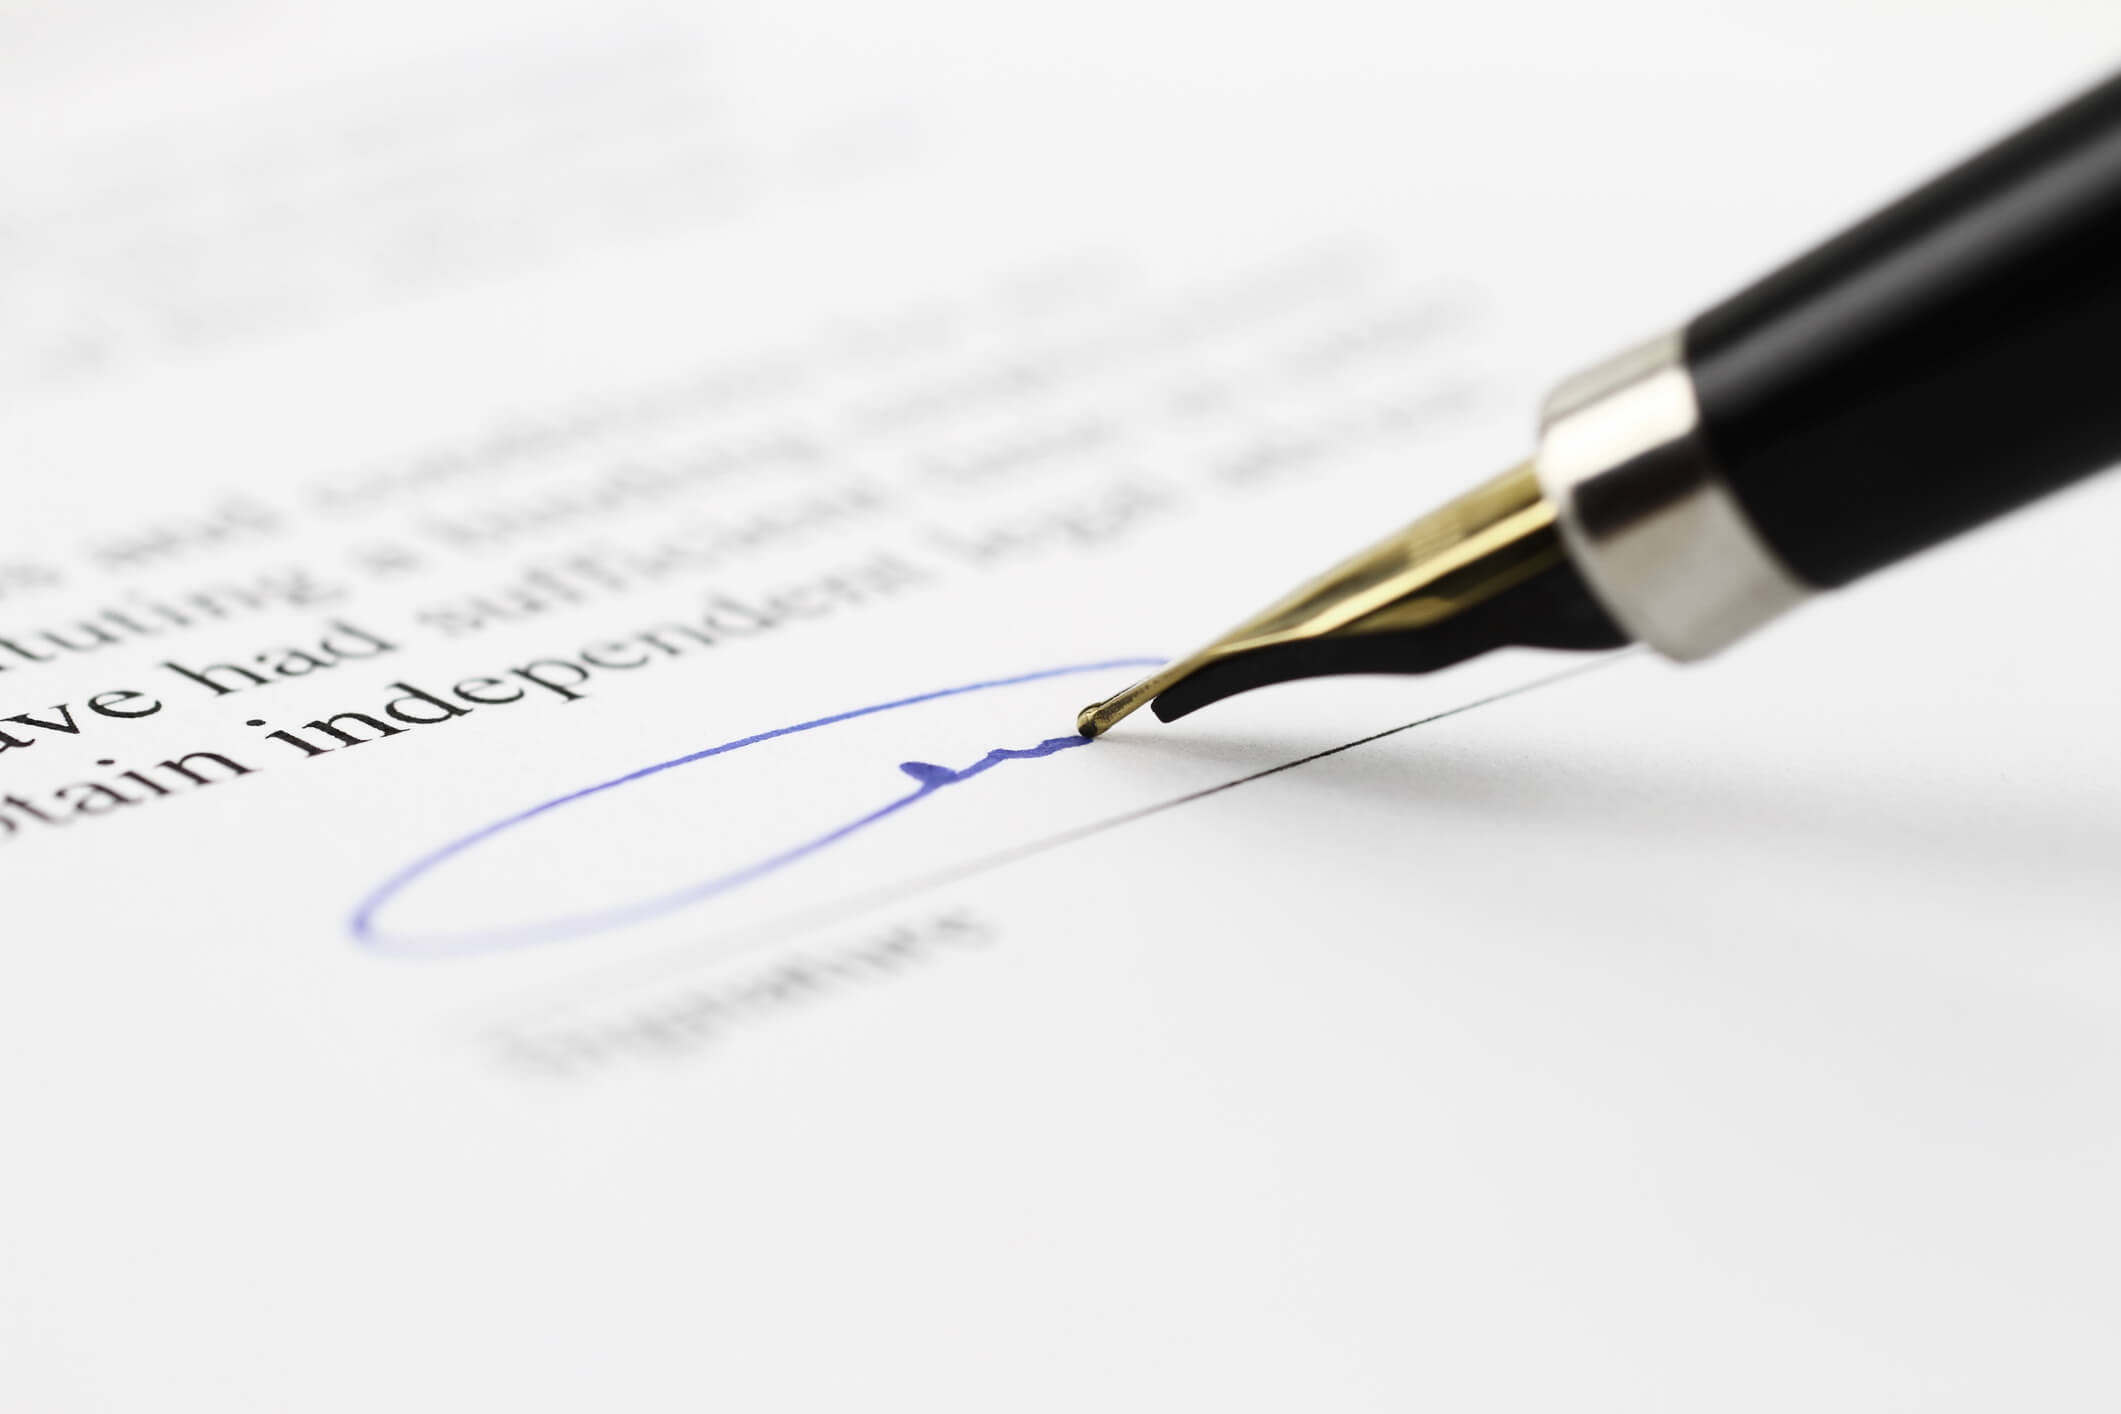 Fountain pen signing a document, close view with center focus